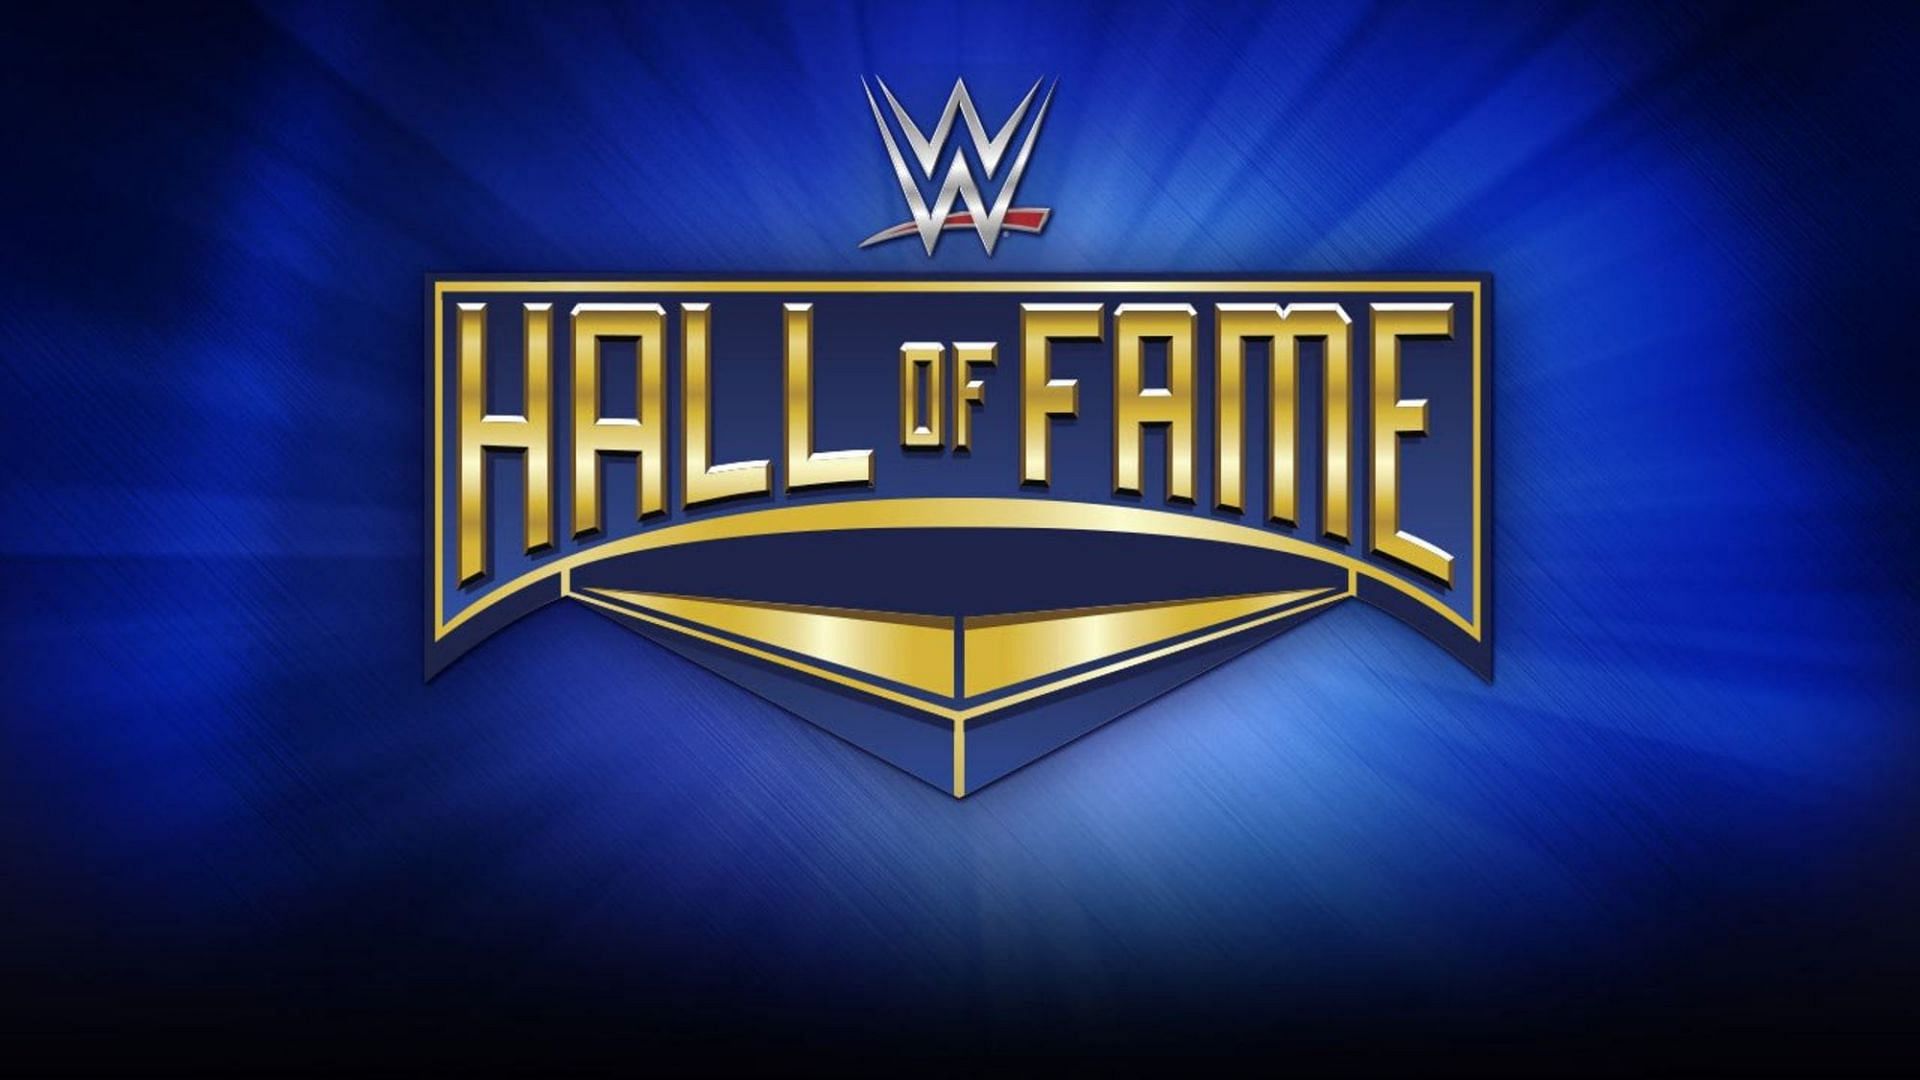 The WWE Hall of Fame is a yearly ceremony